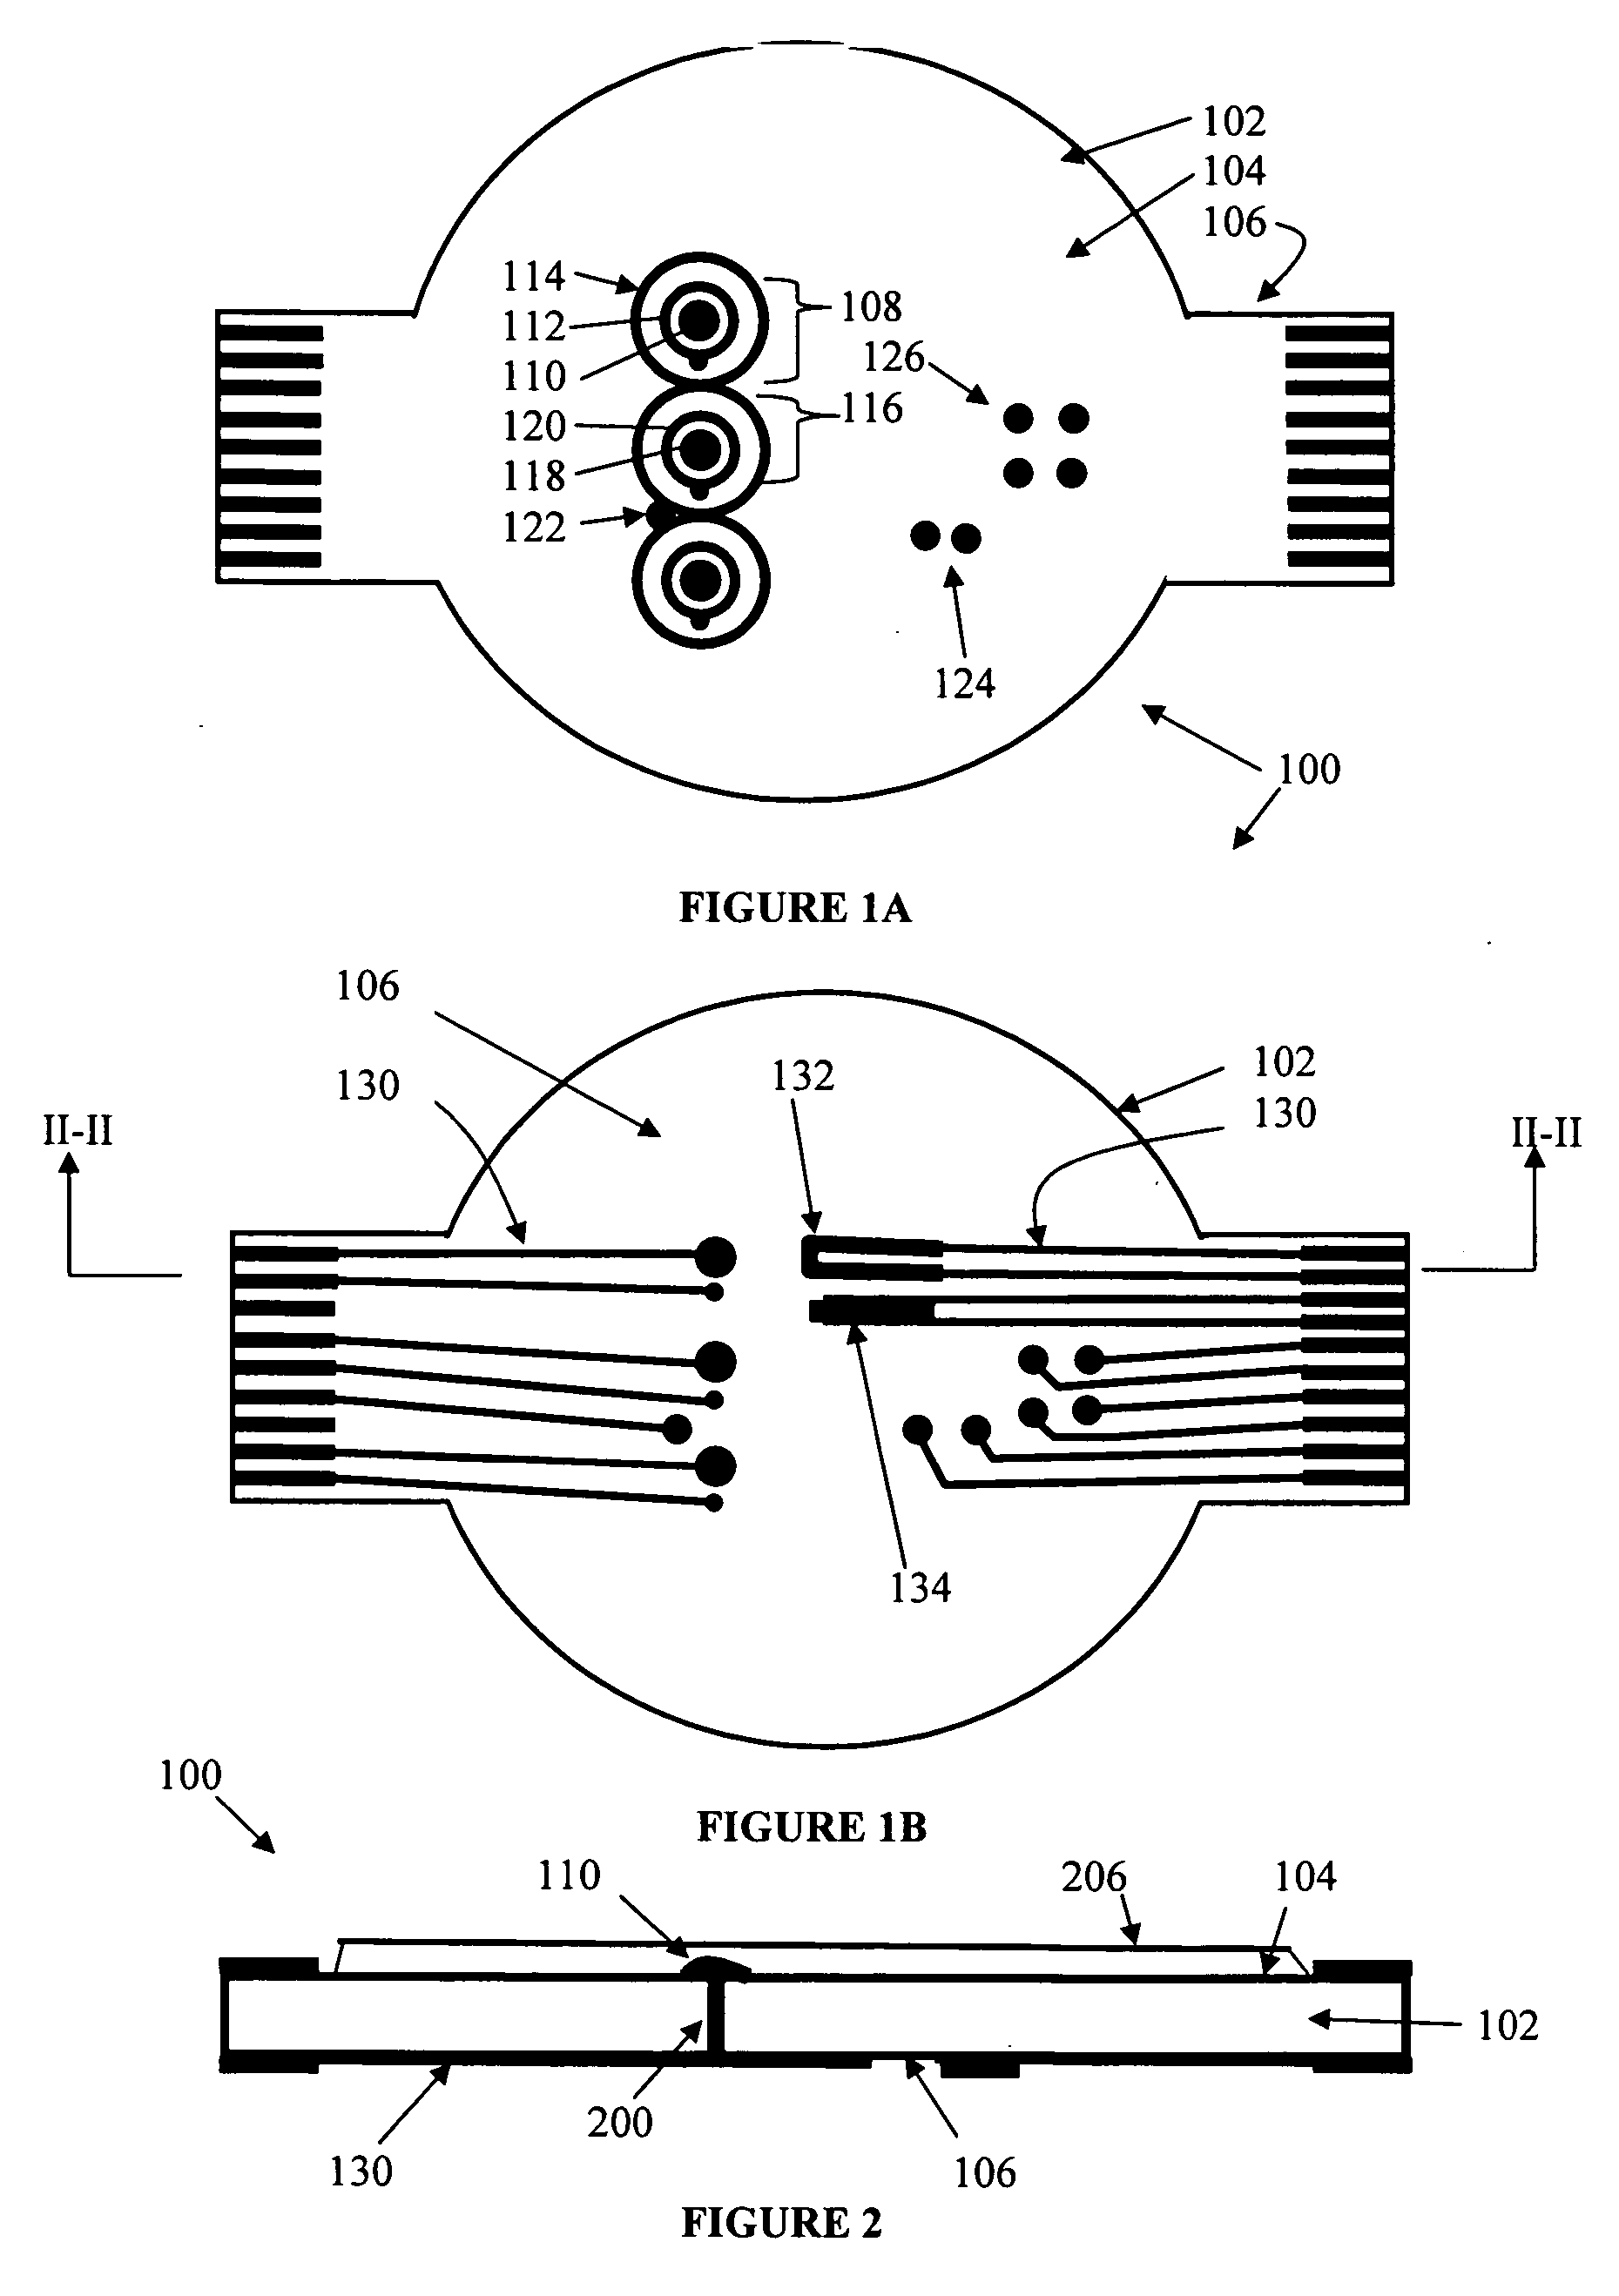 Electro-active sensor, method for constructing the same; apparatus and circuitry for detection of electro-active species